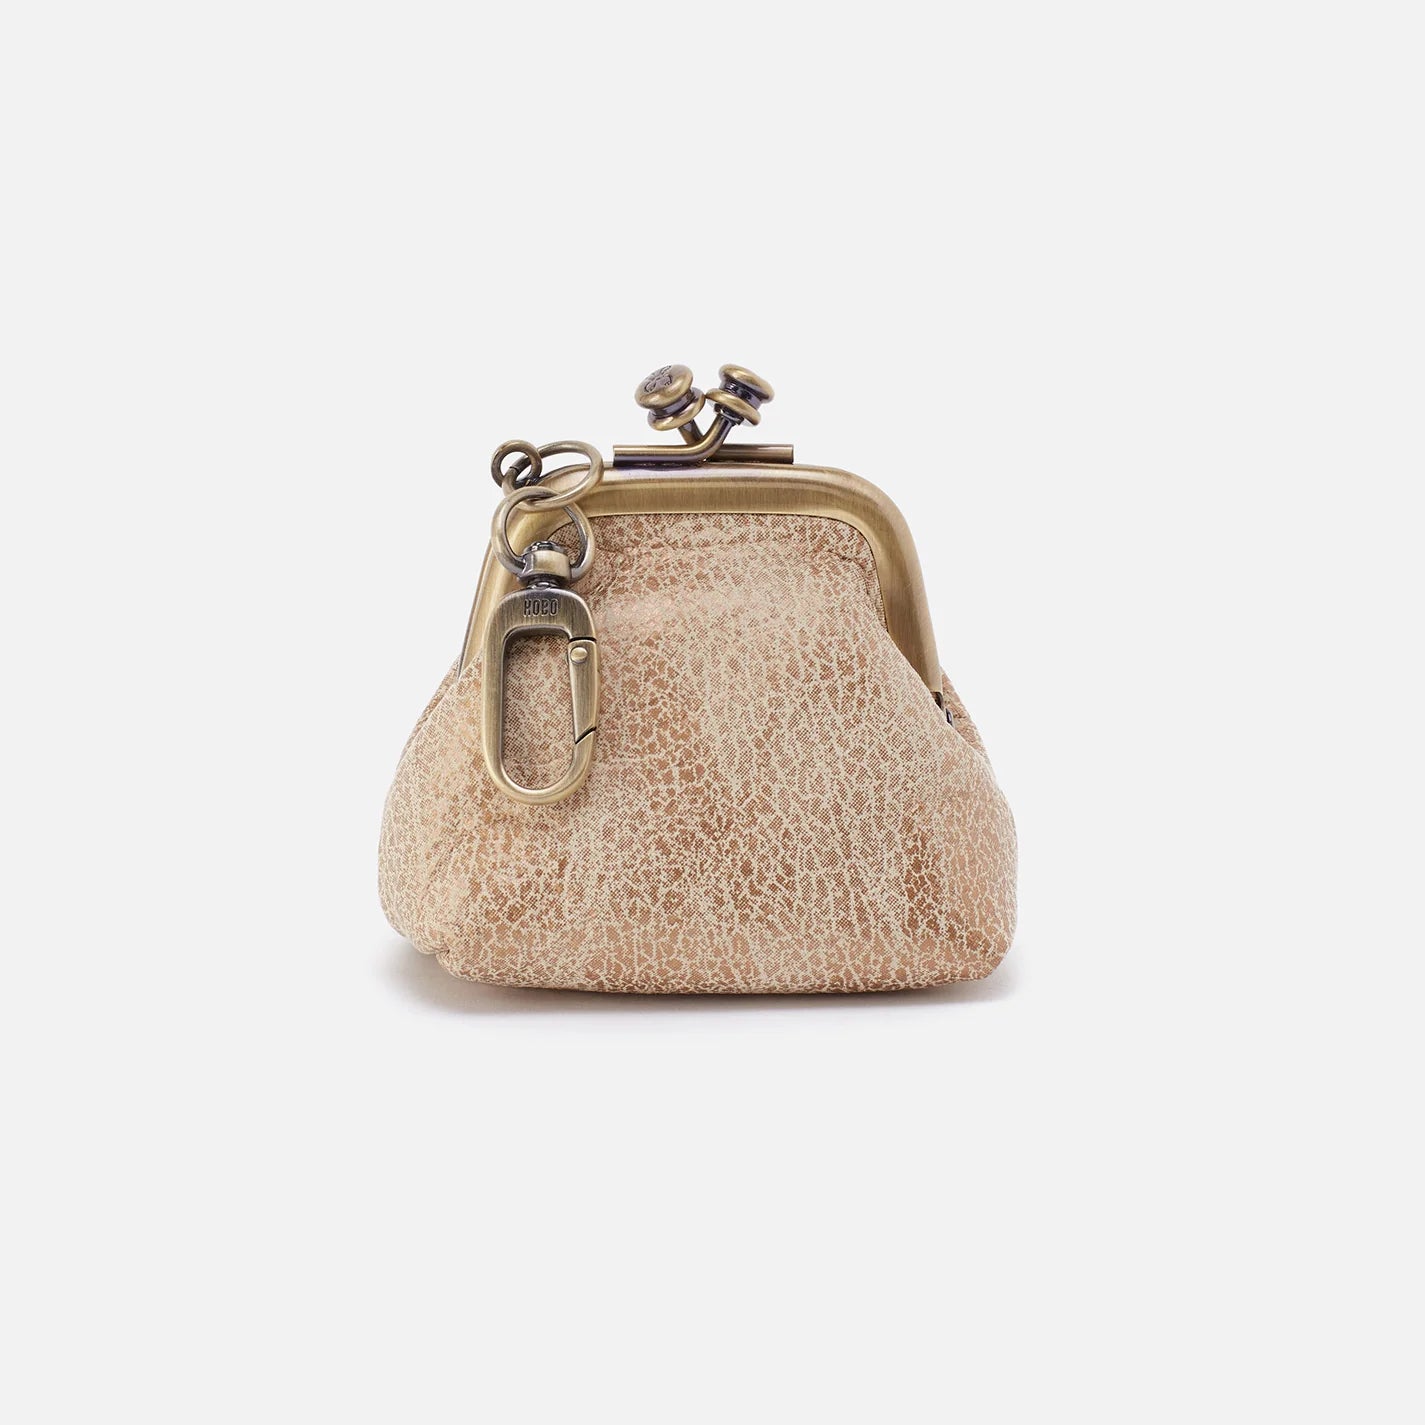 The Run in gold leaf by HOBO is a clip-on vintage-inspired frame pouch that has an easy-to-use clip and room for your original AirPods or other small essentials. Check it out at the Painted Cottage in Edgewater, MD